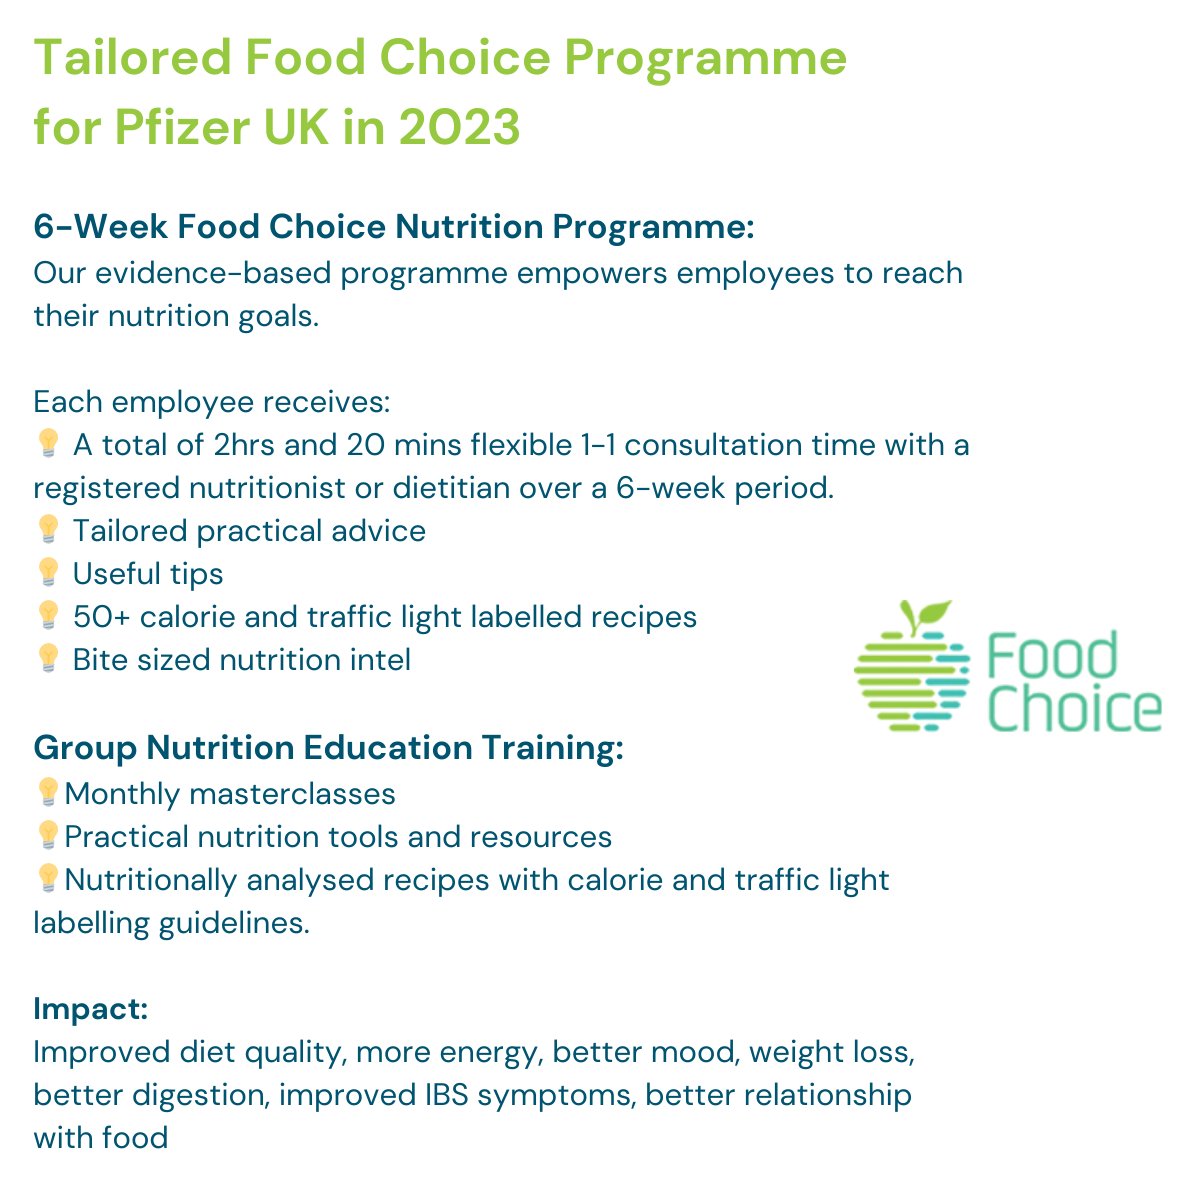 Food Choice is proud to partner with #PfizerUK this year. We developed a tailored year-long programme to support Pfizer employees to eat well to improve their dietary behaviours, health status and overall quality of life.